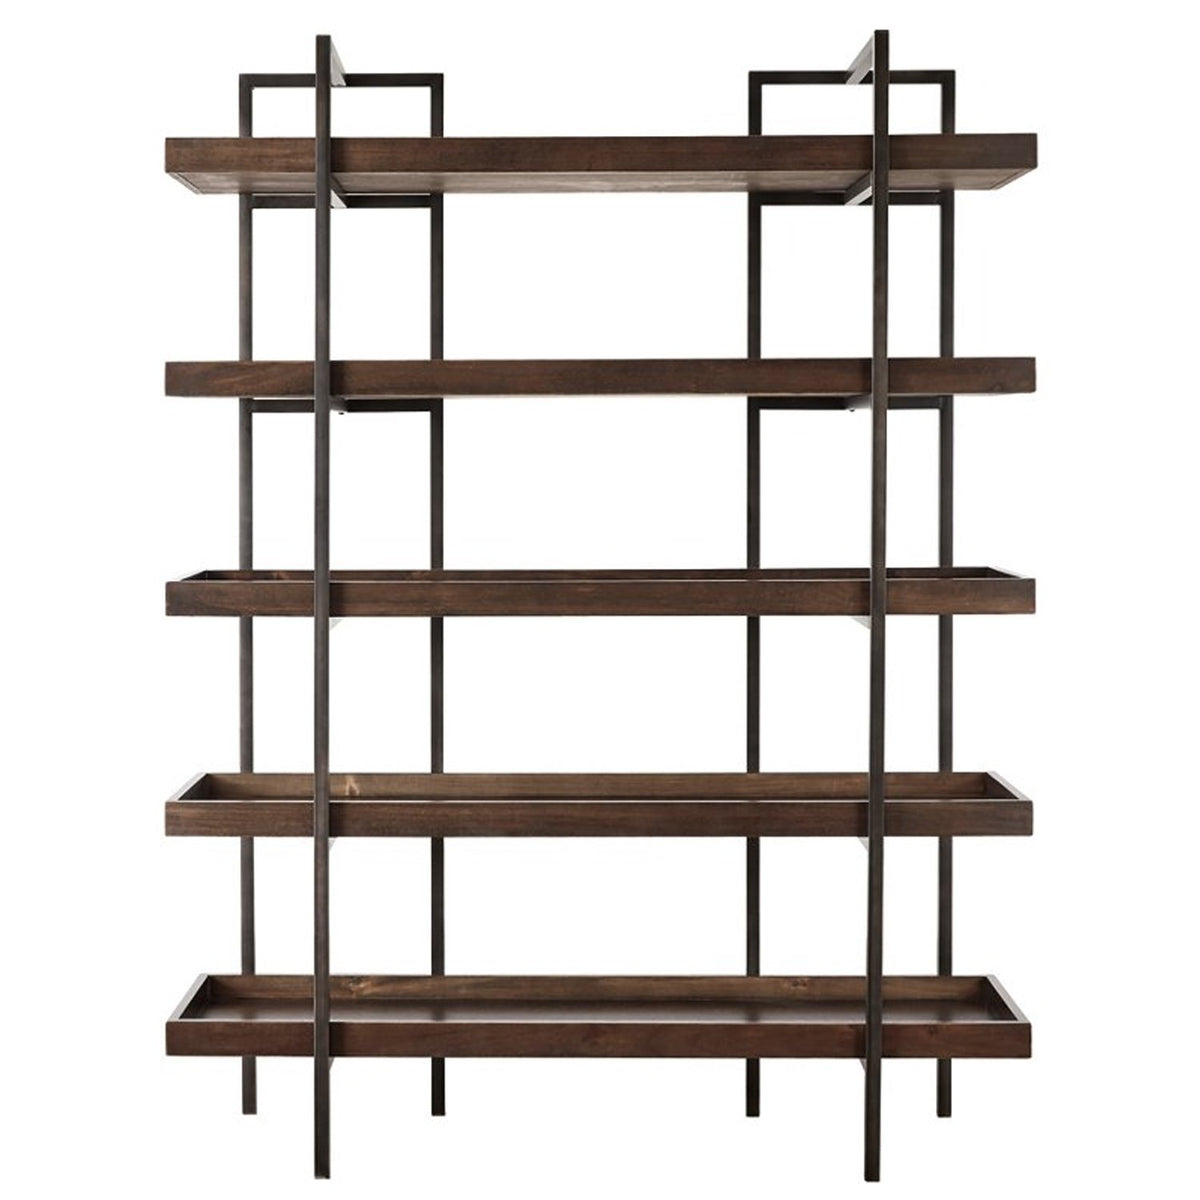 Bookcase with 5 Fixed Wooden Shelves and Metal Frame in Brown and Black - BM209257